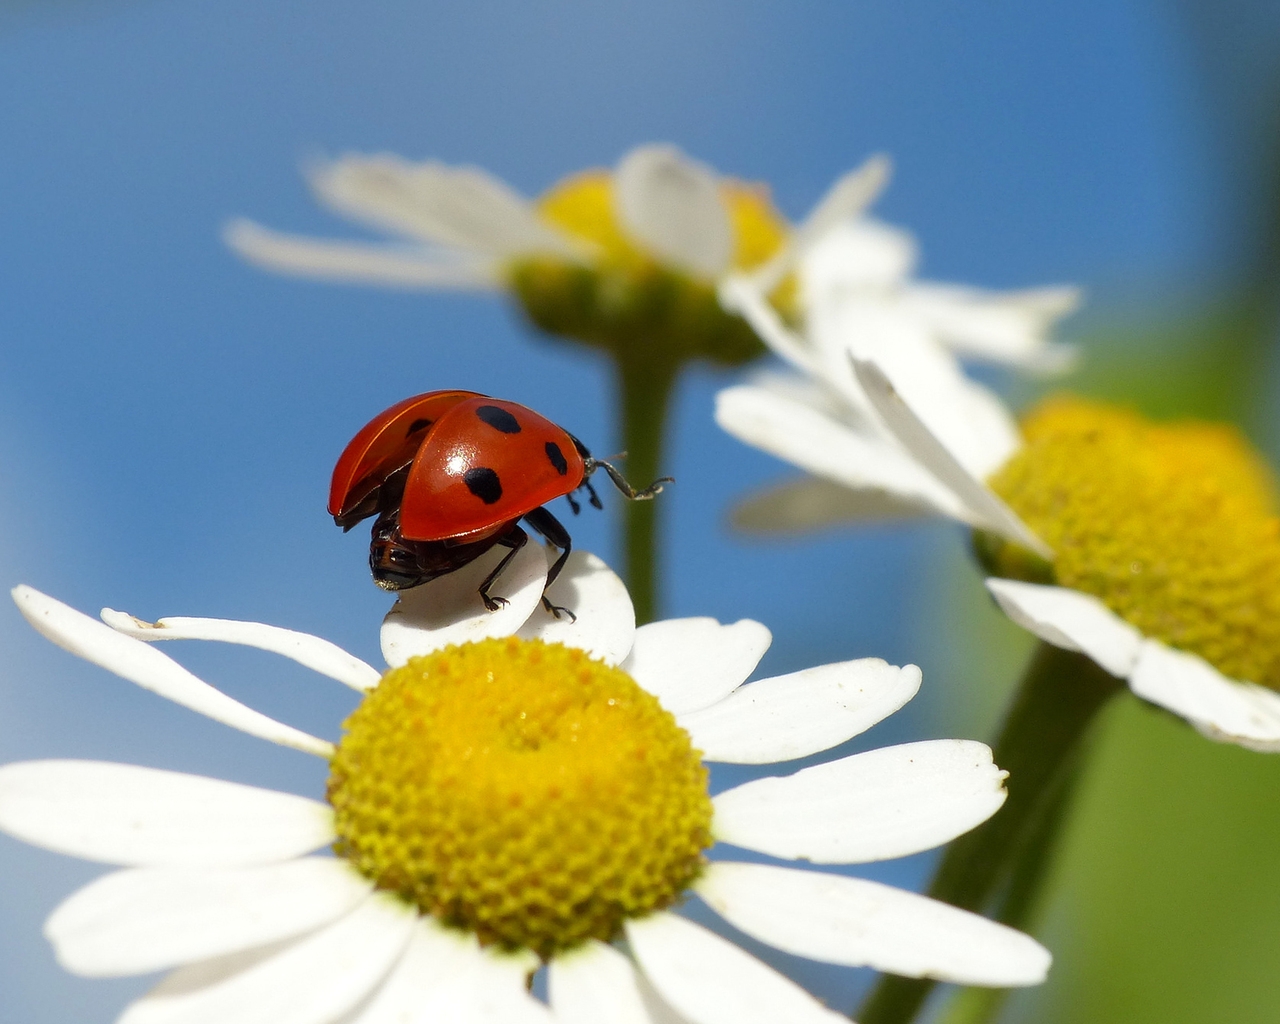 Ladybug on a Chamomile Flower for 1280 x 1024 resolution